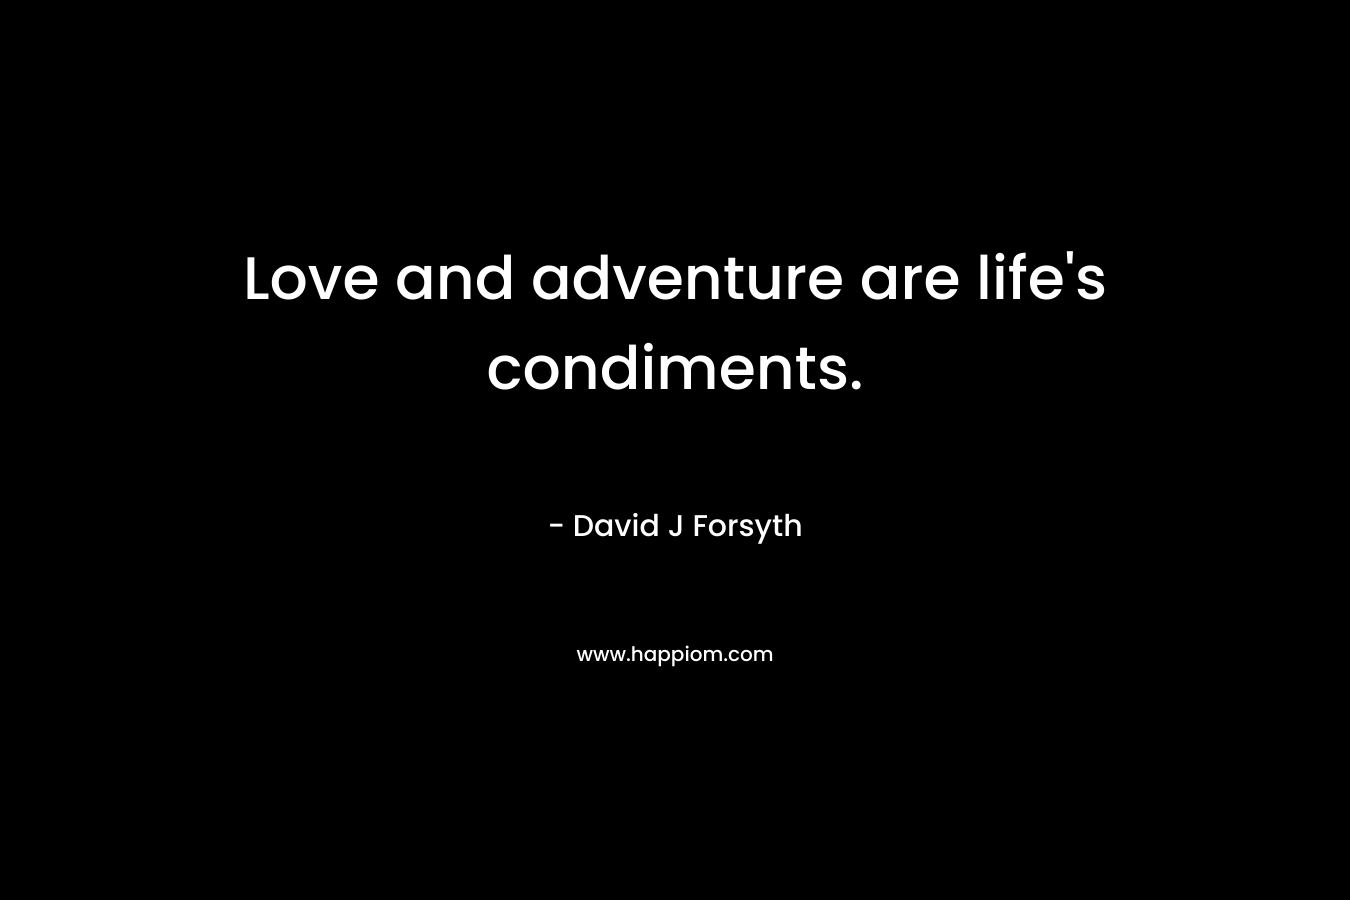 Love and adventure are life’s condiments. – David J Forsyth